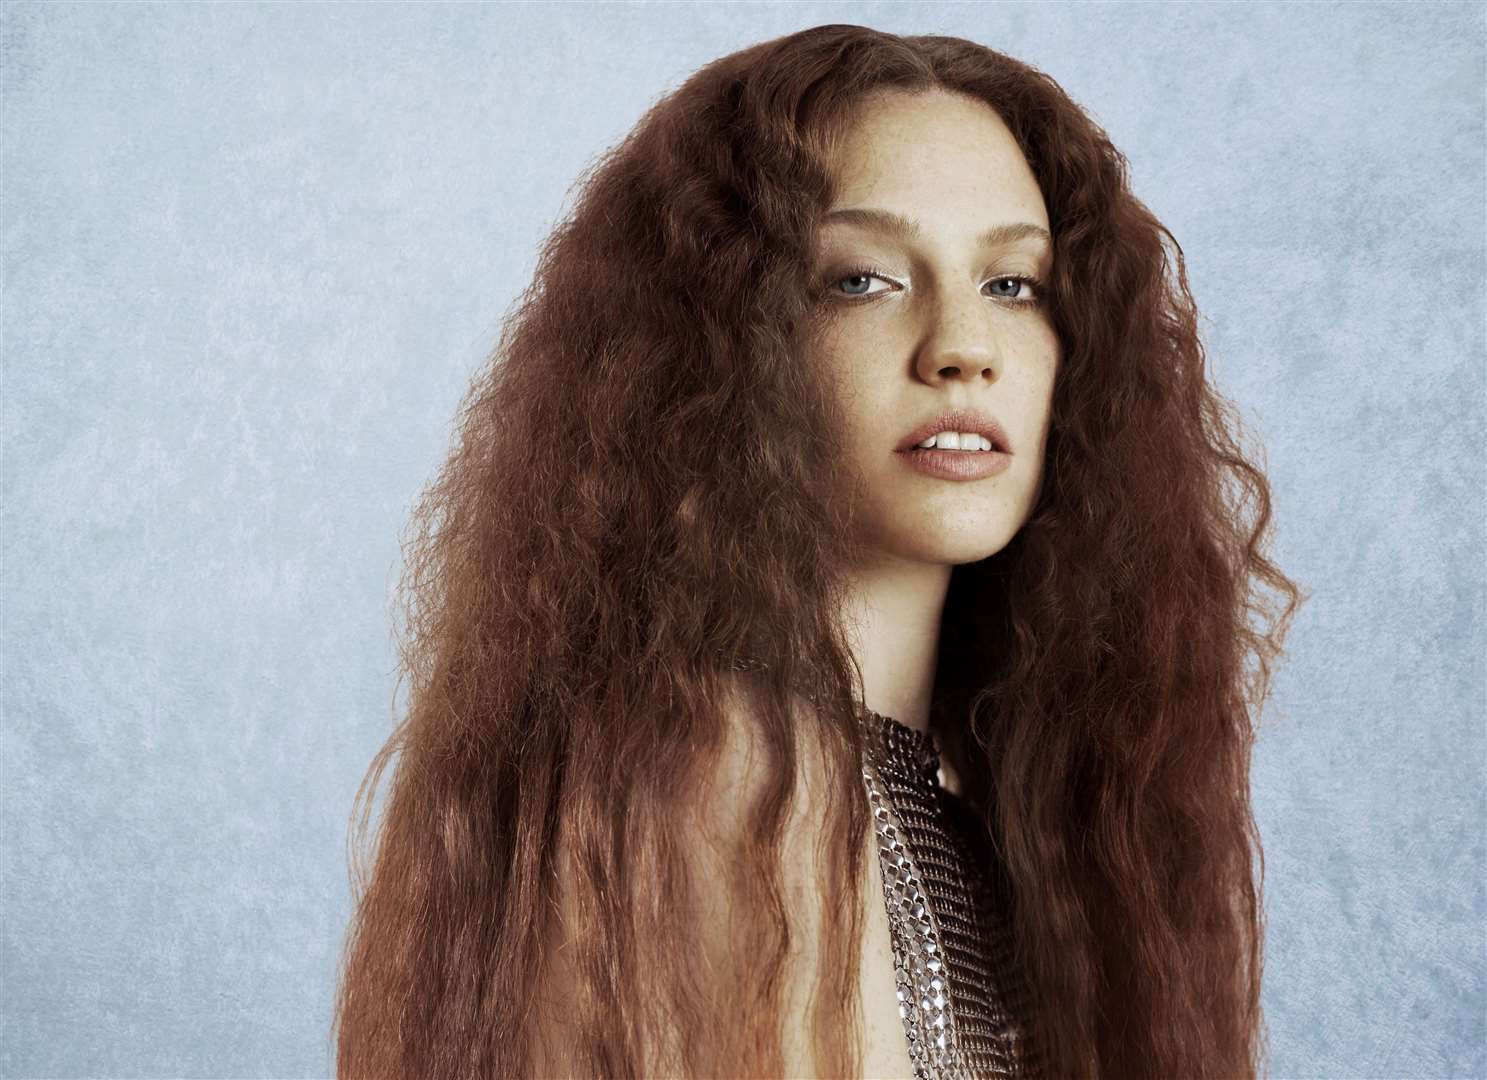 Jess Glynne pulled out of performing at Rochester Castle Concerts due to ill health